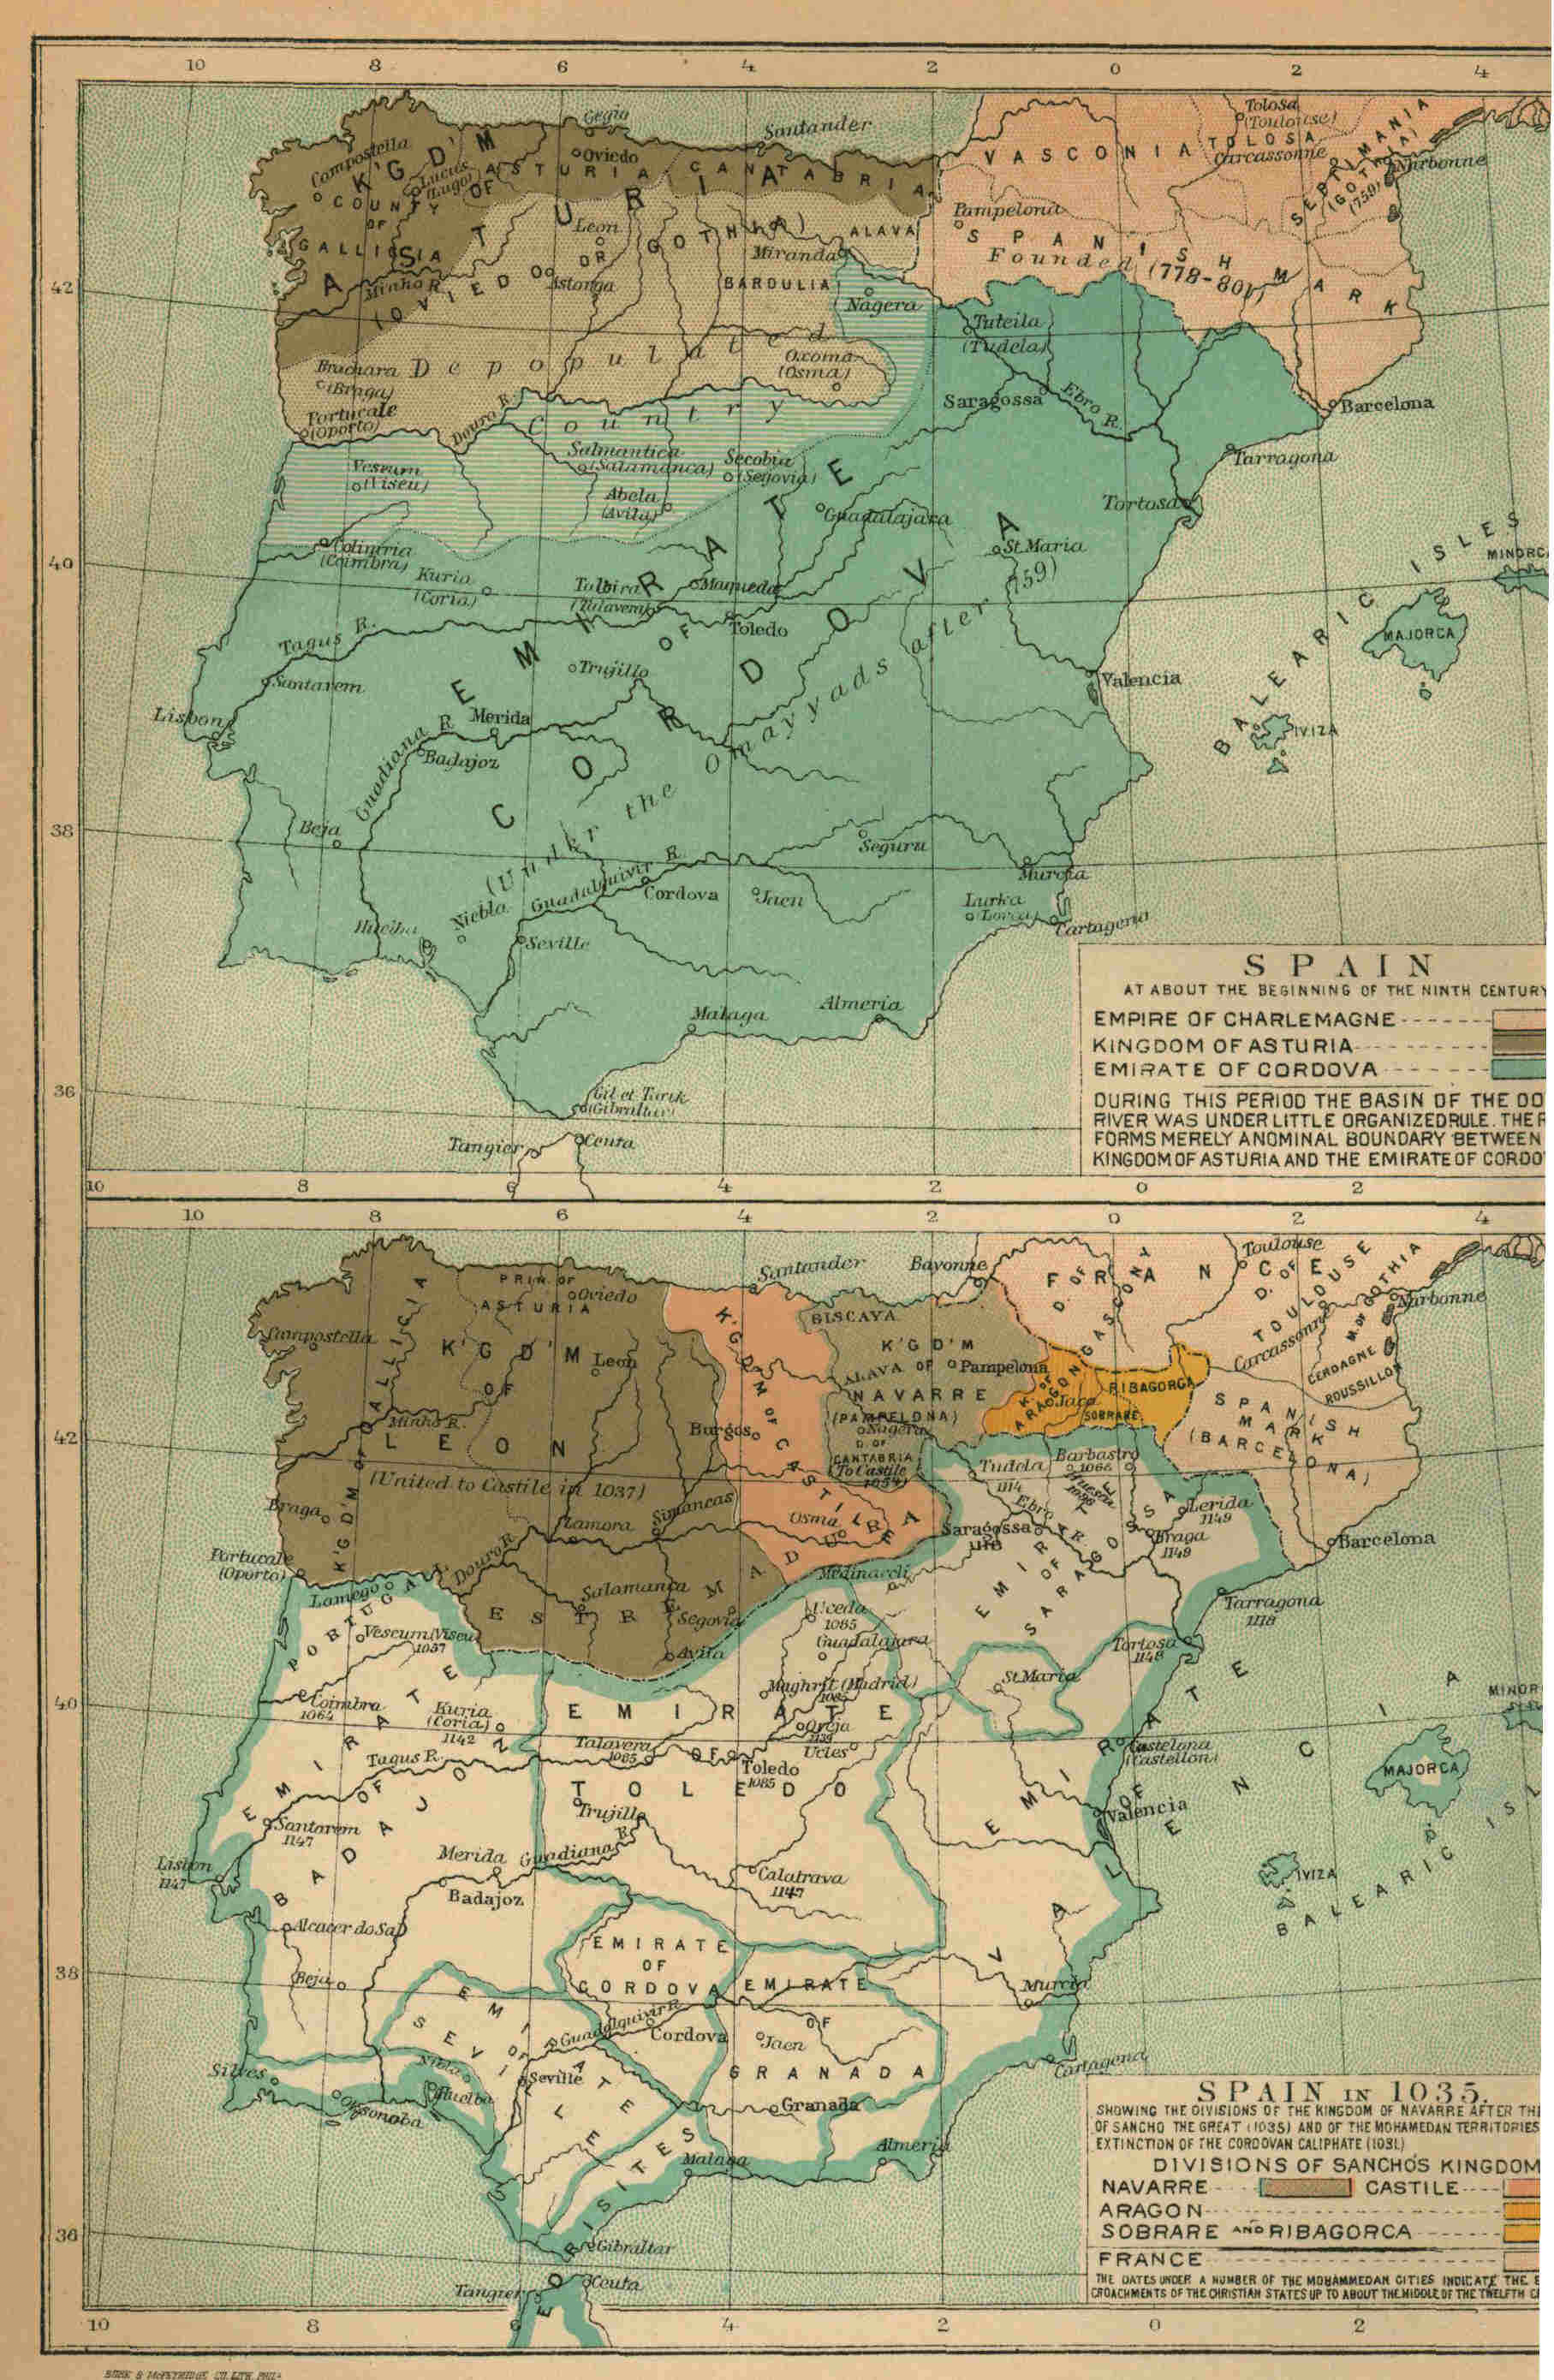 SPAIN AT ABOUT THE BEGINNING OF THE NINTH CENTURY